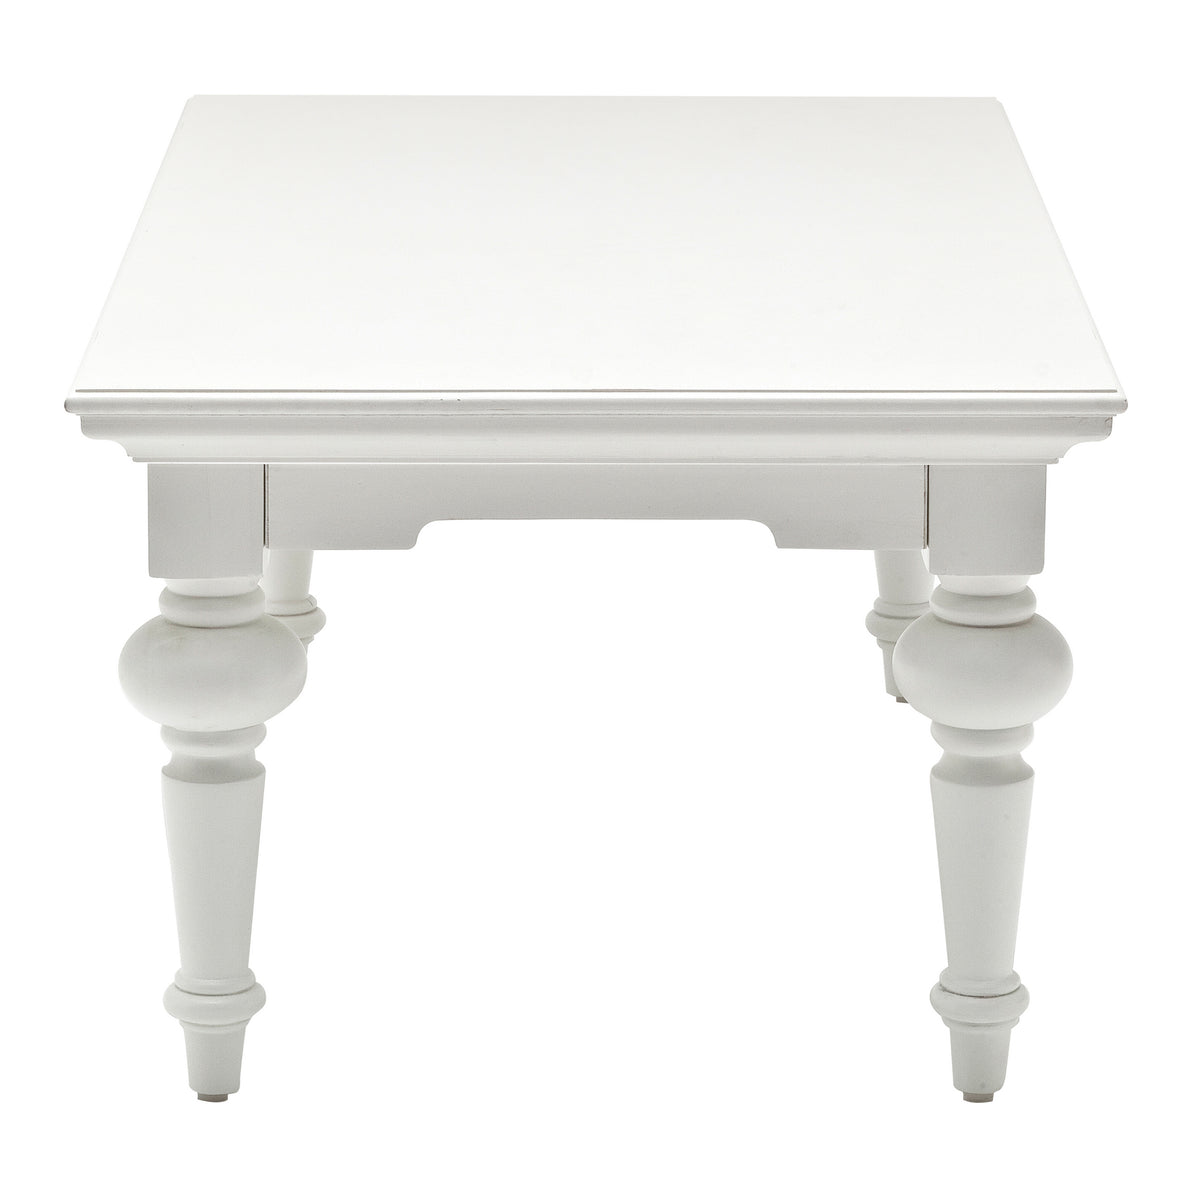 Provence Rectangular Coffee Table - Classic White - Notbrand